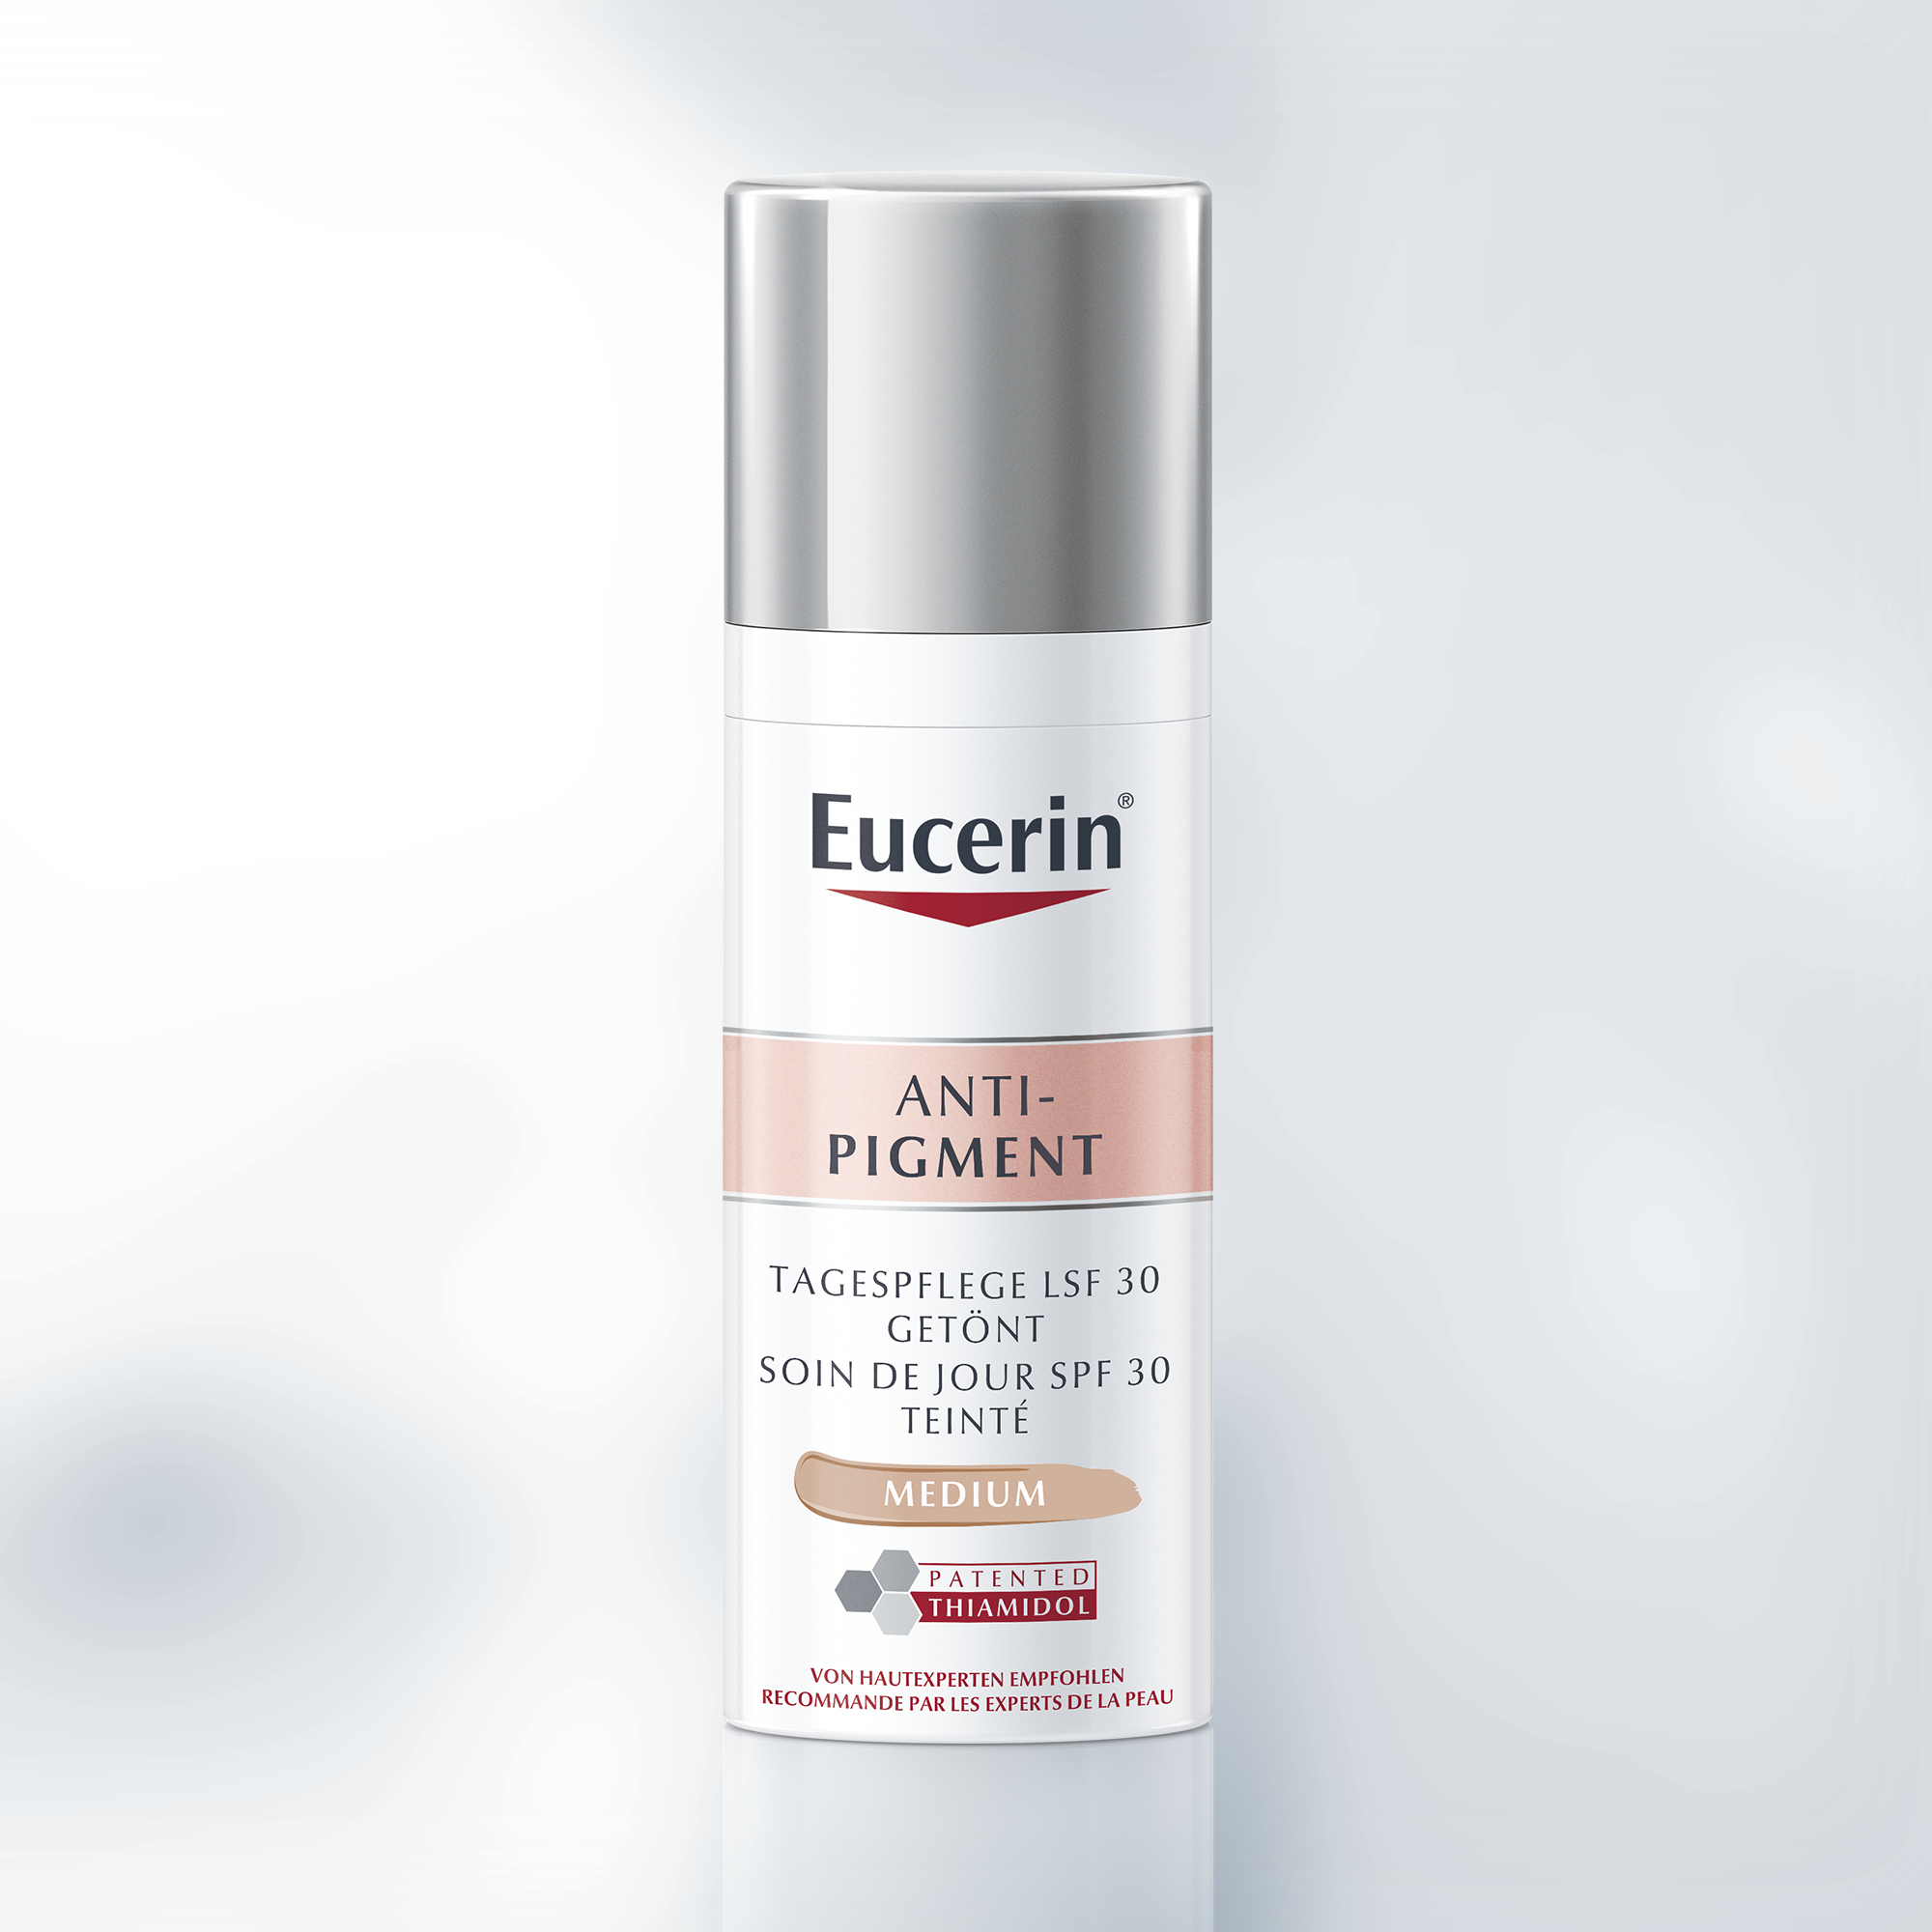 Eucerin Anti-Pigment Day SPF 30 Tinted Light provides coverage.